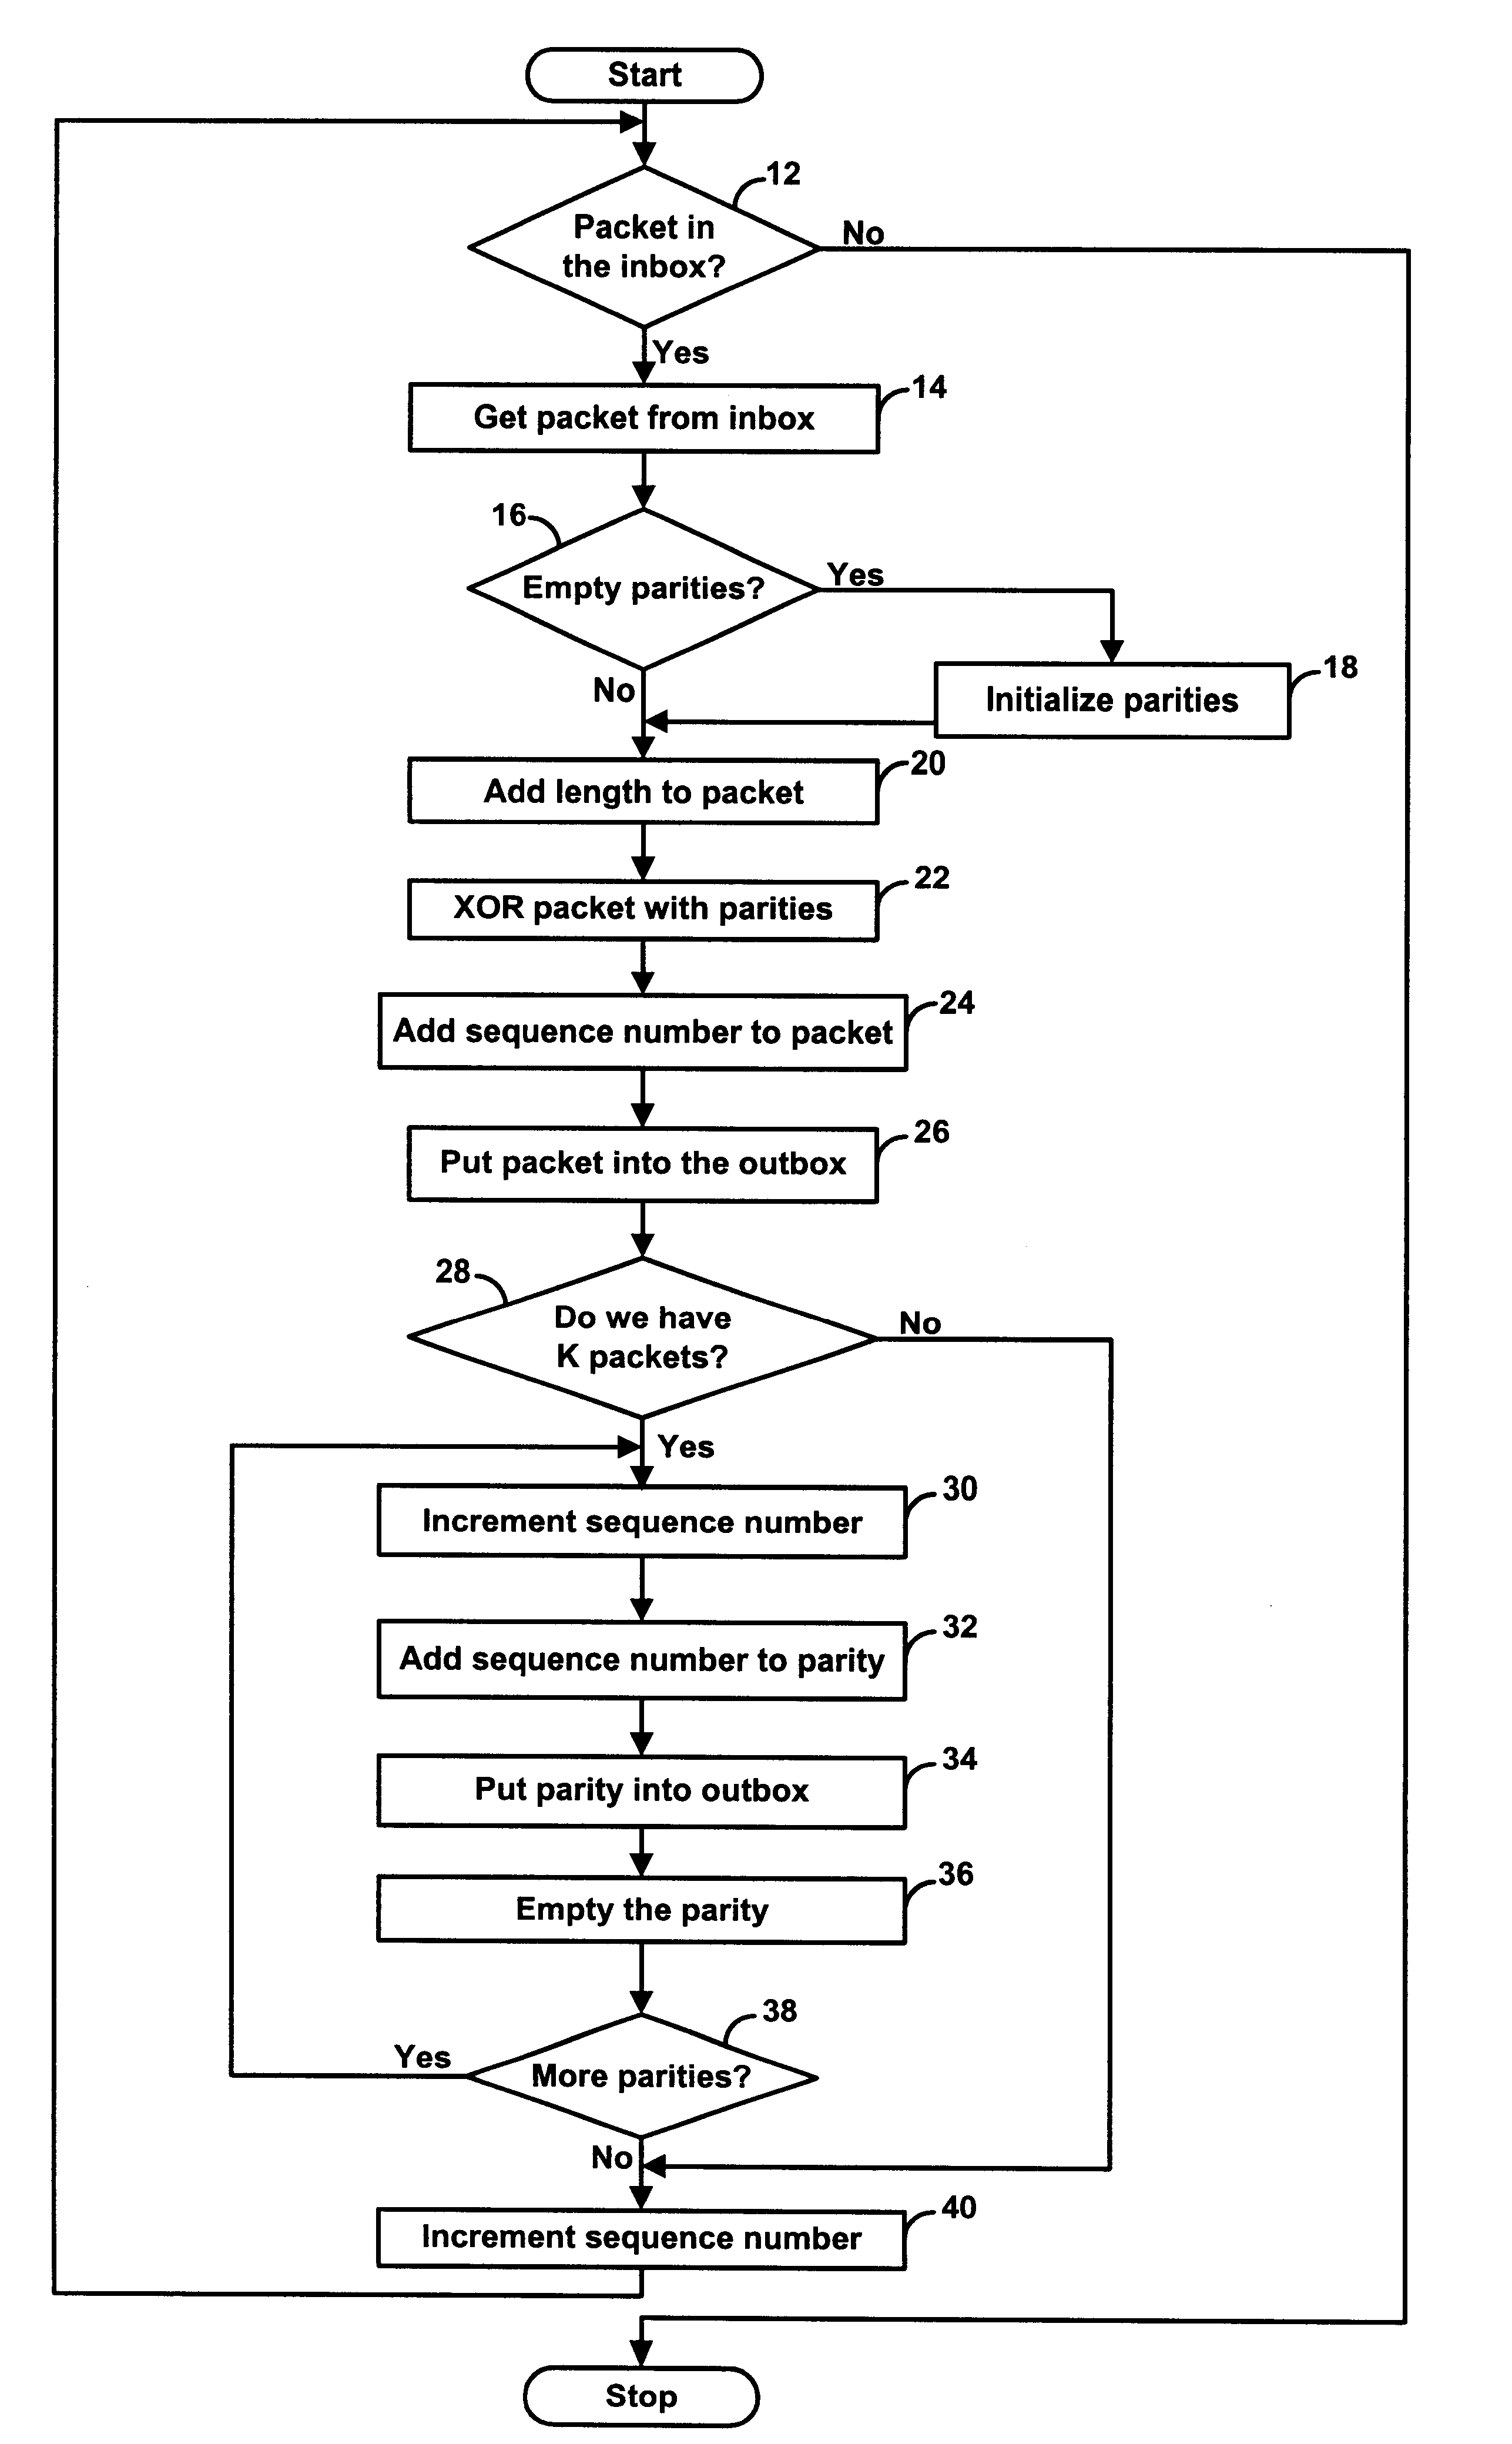 Forward error correction system for packet based data and real time media, using cross-wise parity calculation